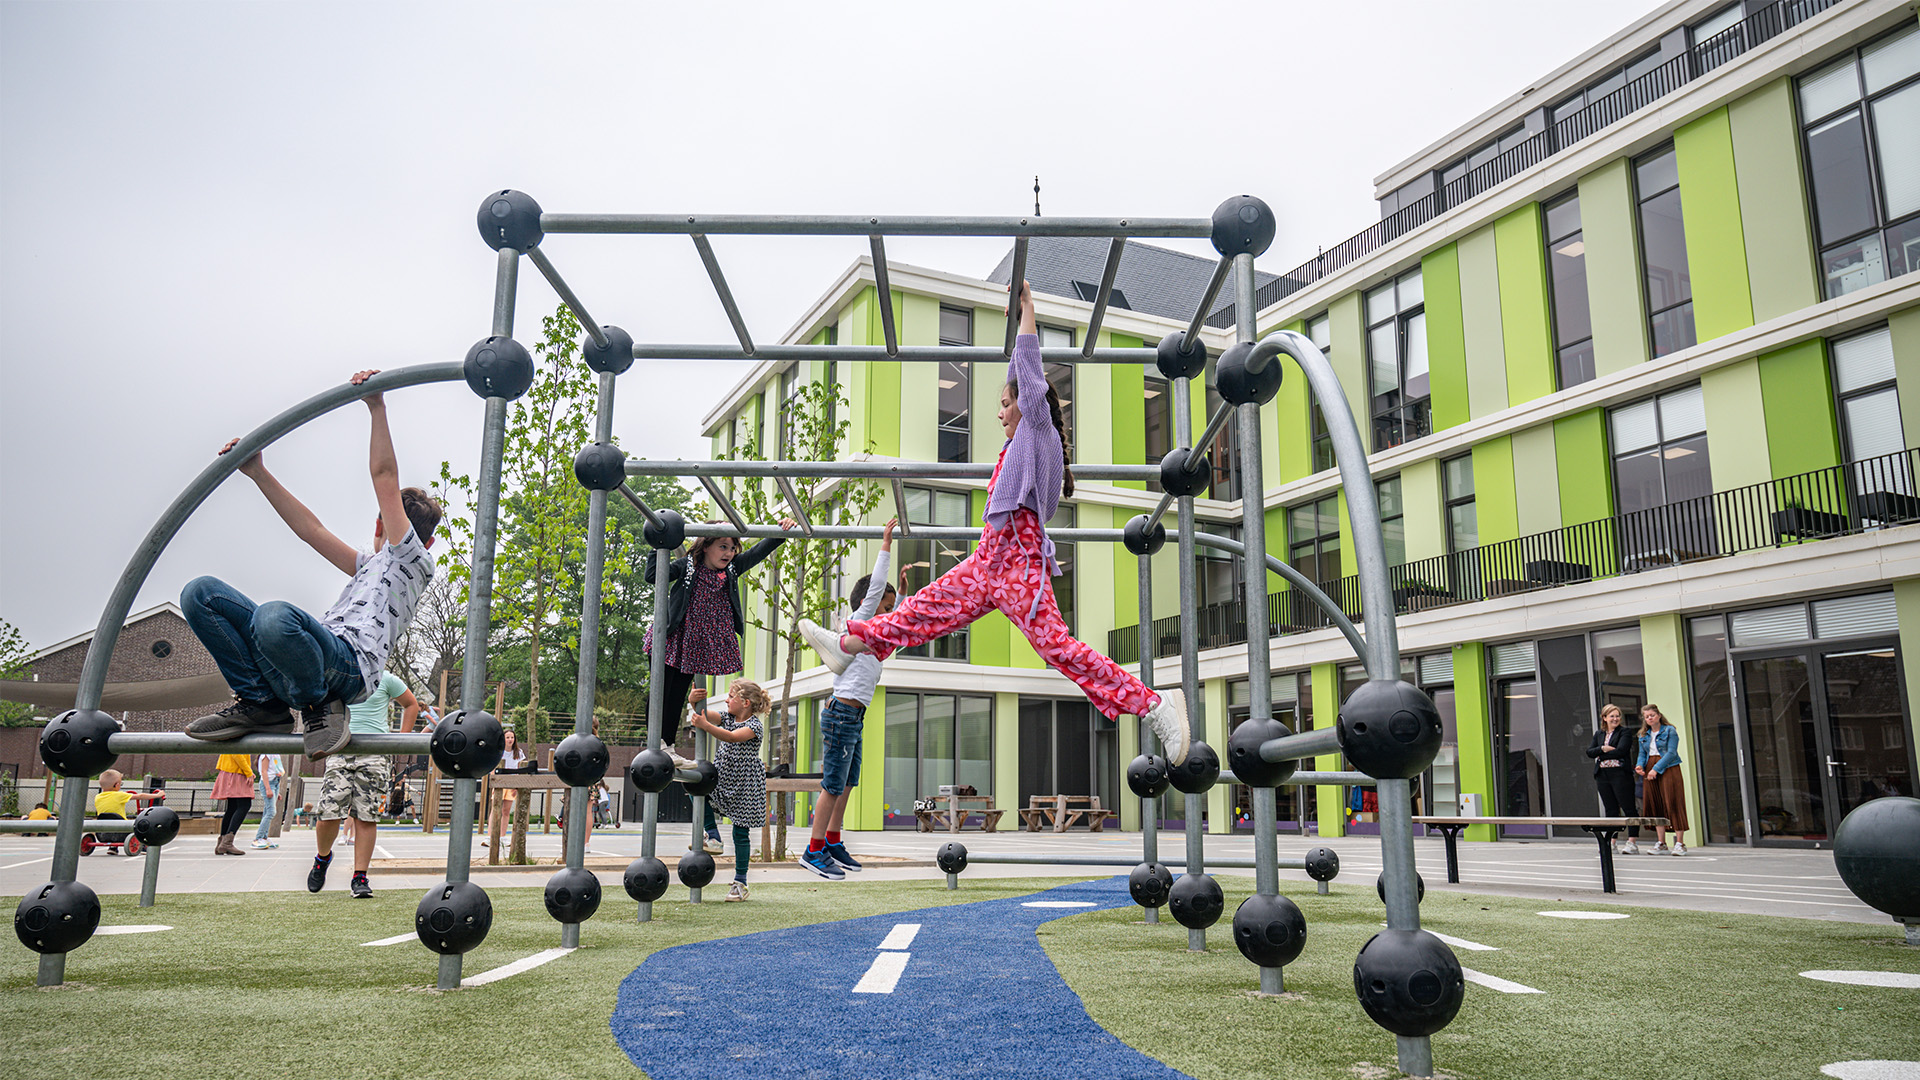 Children playfully climb on a modern jungle gym structure at a colorful outdoor playground next to a contemporary school building. Some children dangle from the equipment while others climb, enjoying an active and fun outdoor activity.